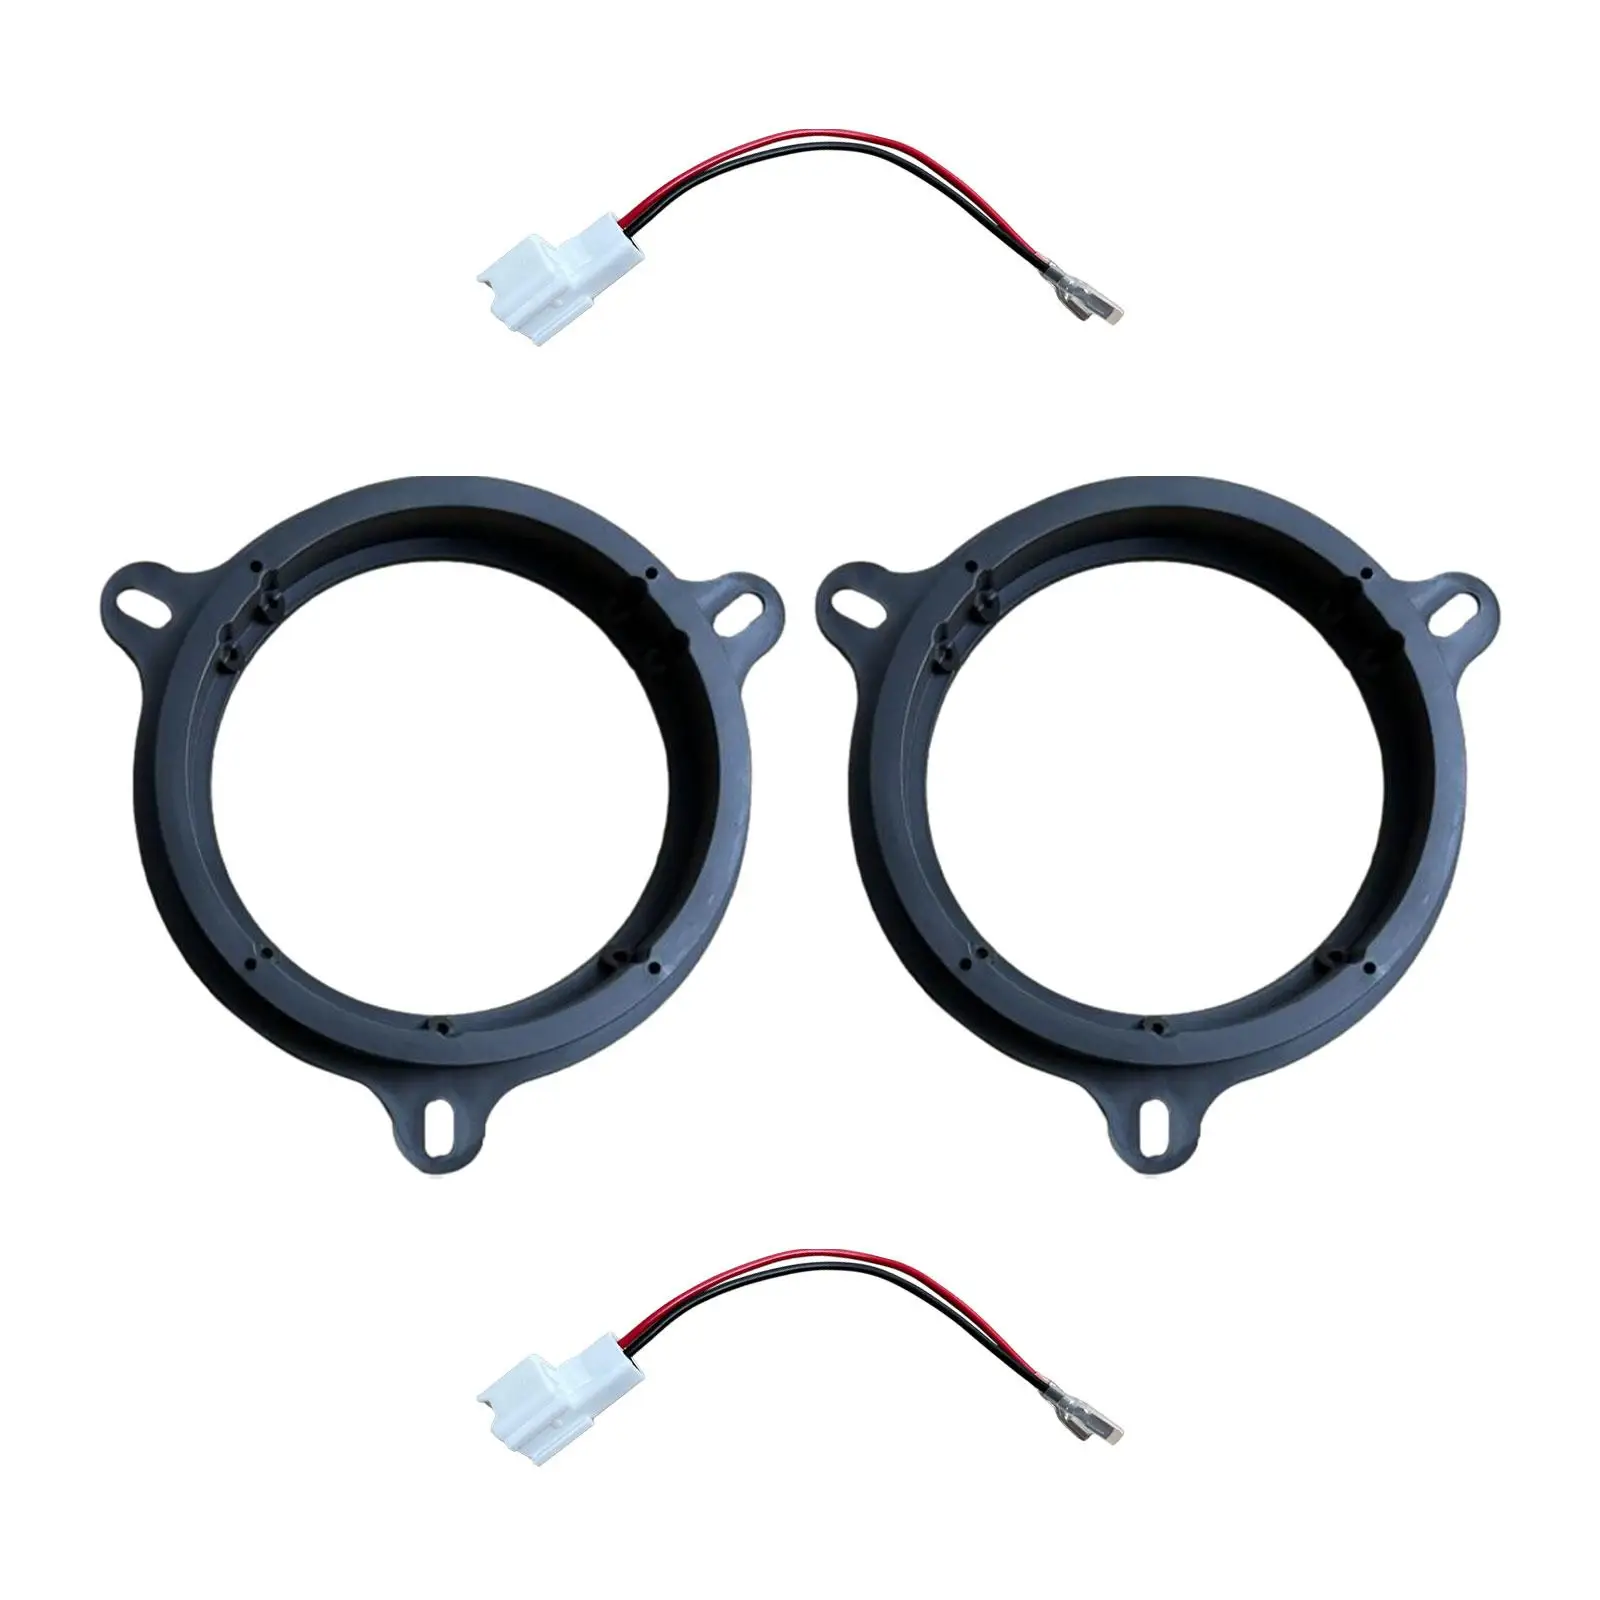 Wiring Harness Set Gasket Mount Shims Mounting Car Speaker Spacer Vehicles Spacer Accessories Universal Adapter